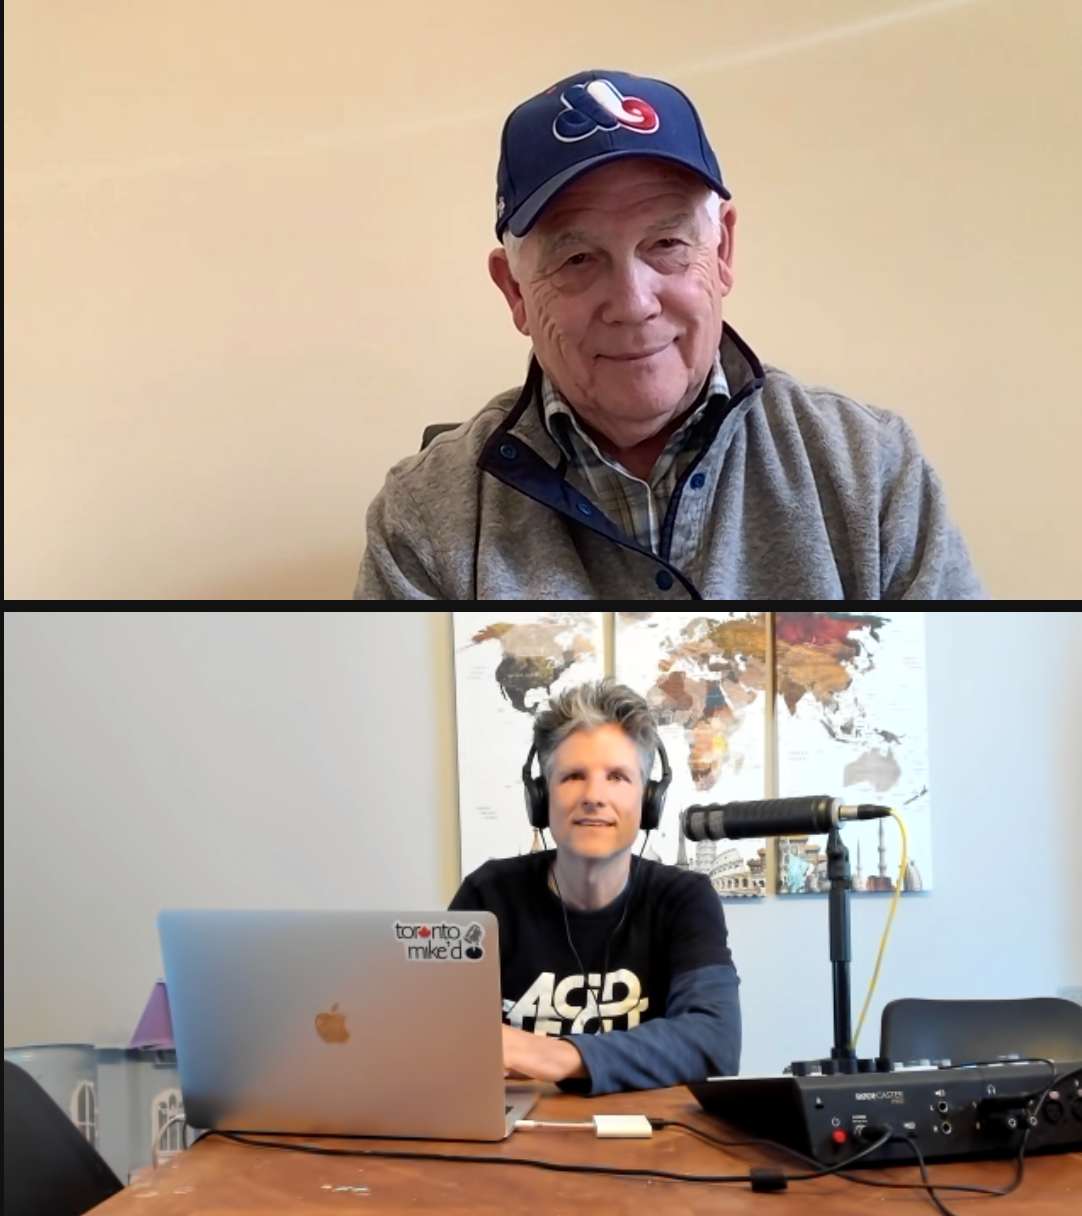 Dave Hodge's 100 Songs of 2021: Toronto Mike'd Podcast Episode 954